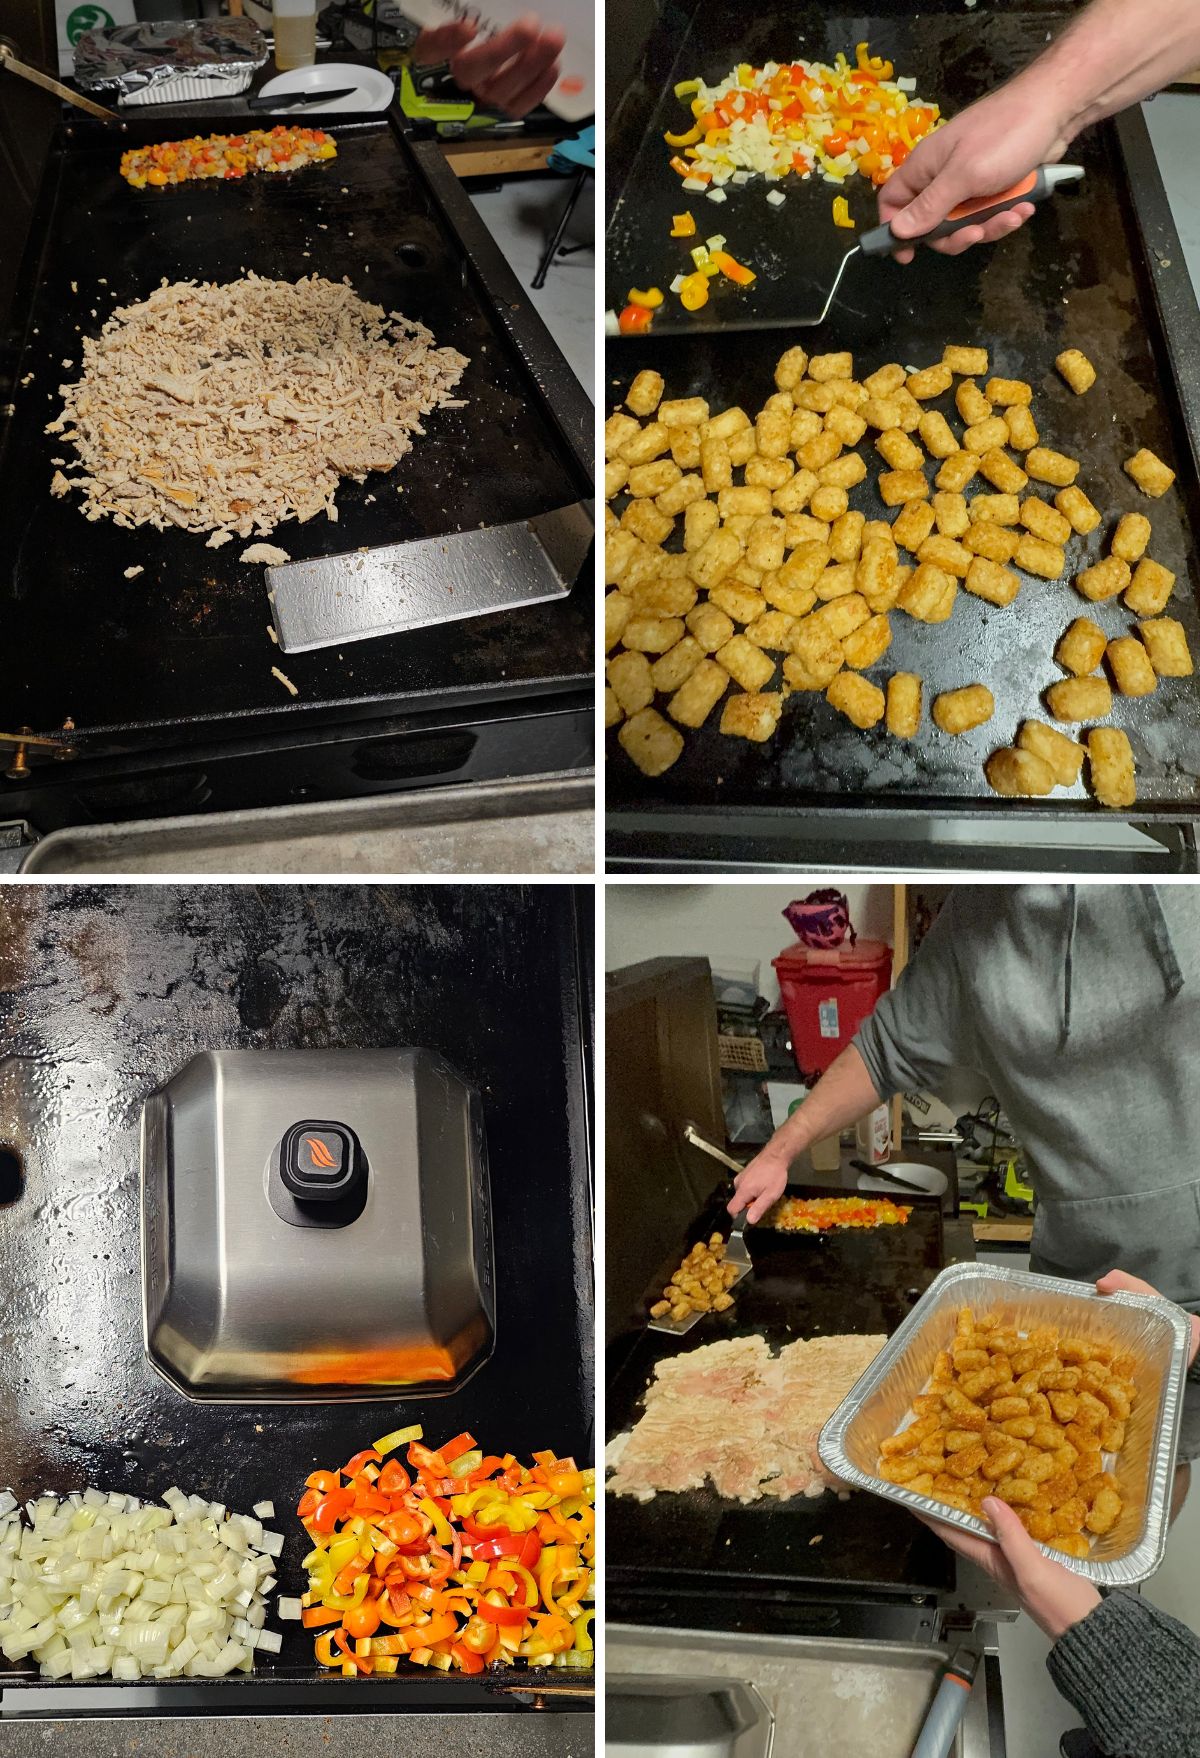 A collage of four images showing the preparation of a meal on a flat-top grill, featuring chopped vegetables, cooked rice, and tater tots.